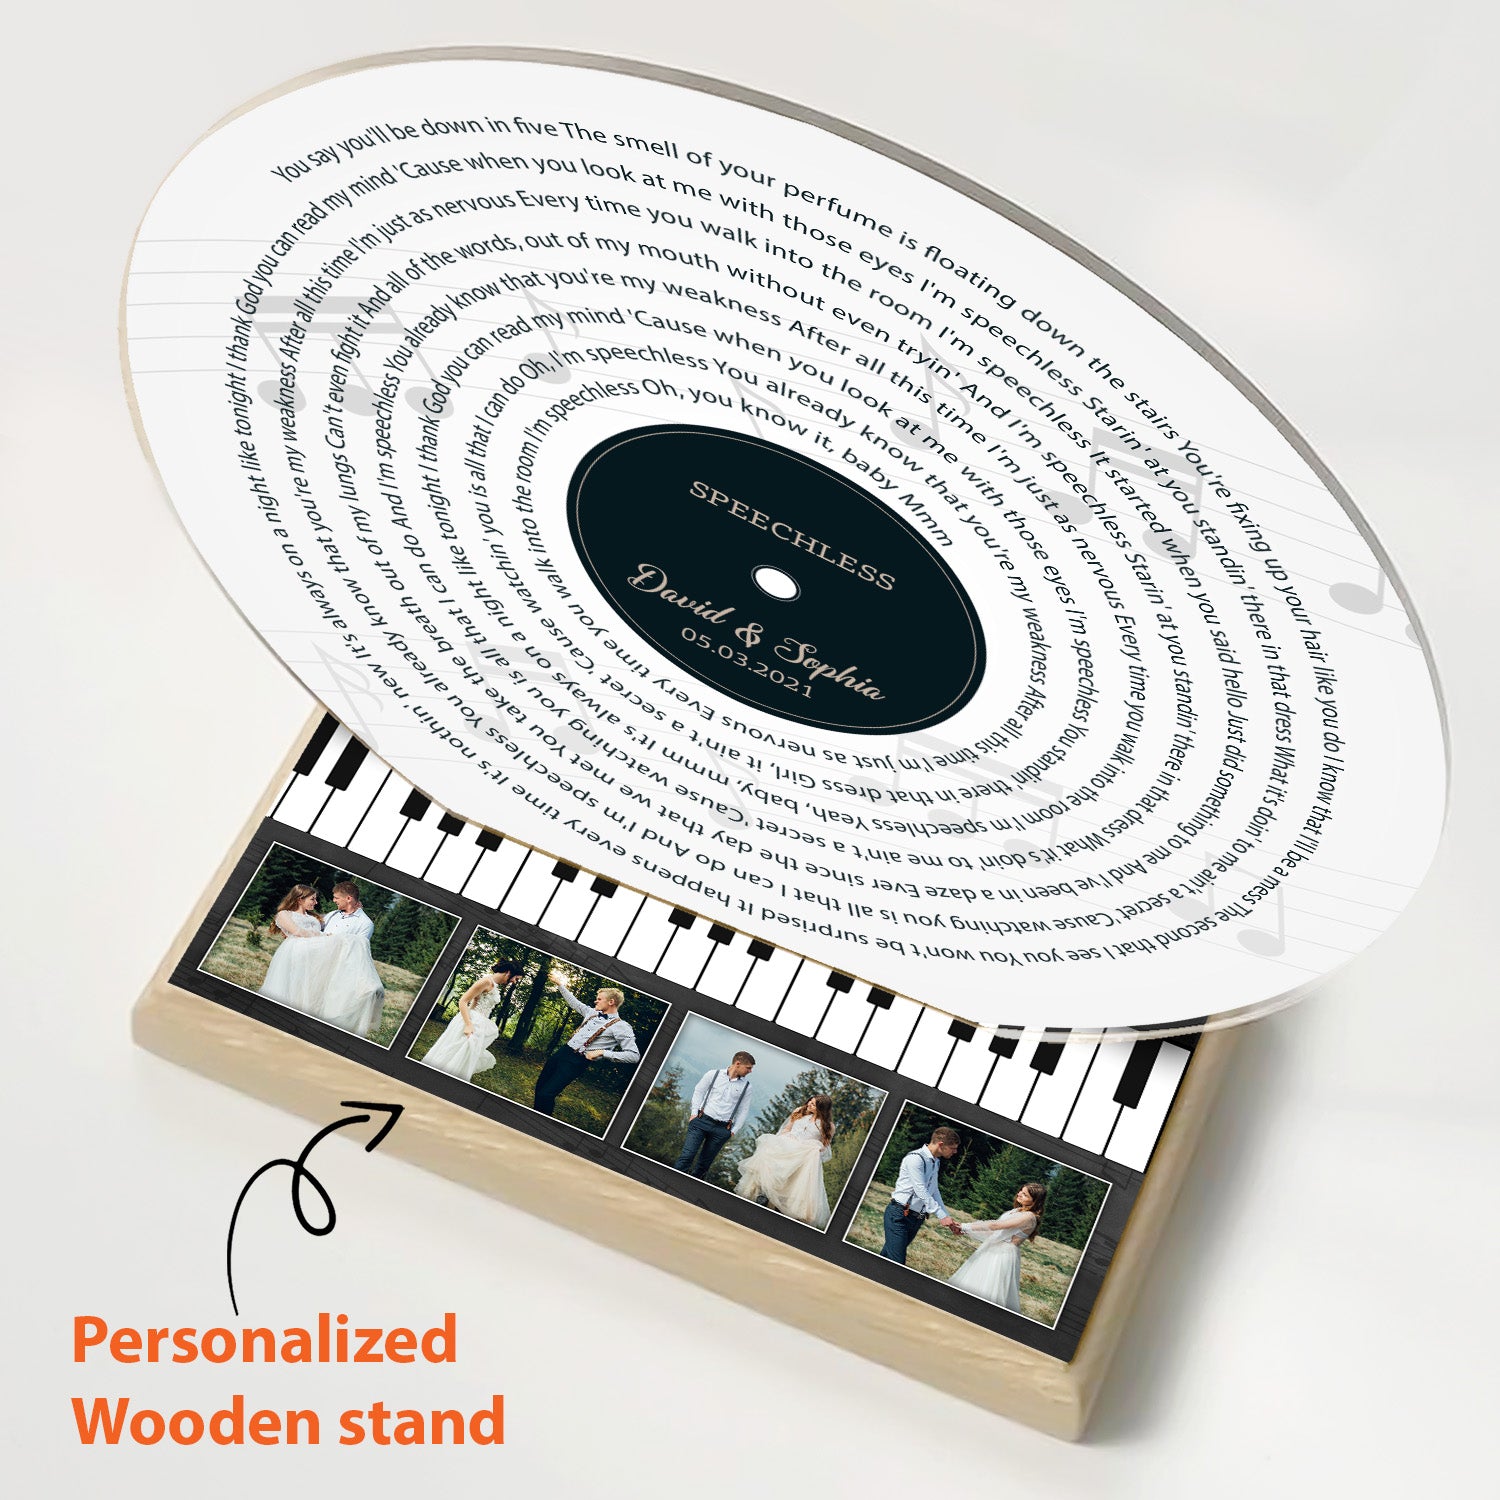 Personalized Vinyl Record Song With Lyrics on Acrylic With 